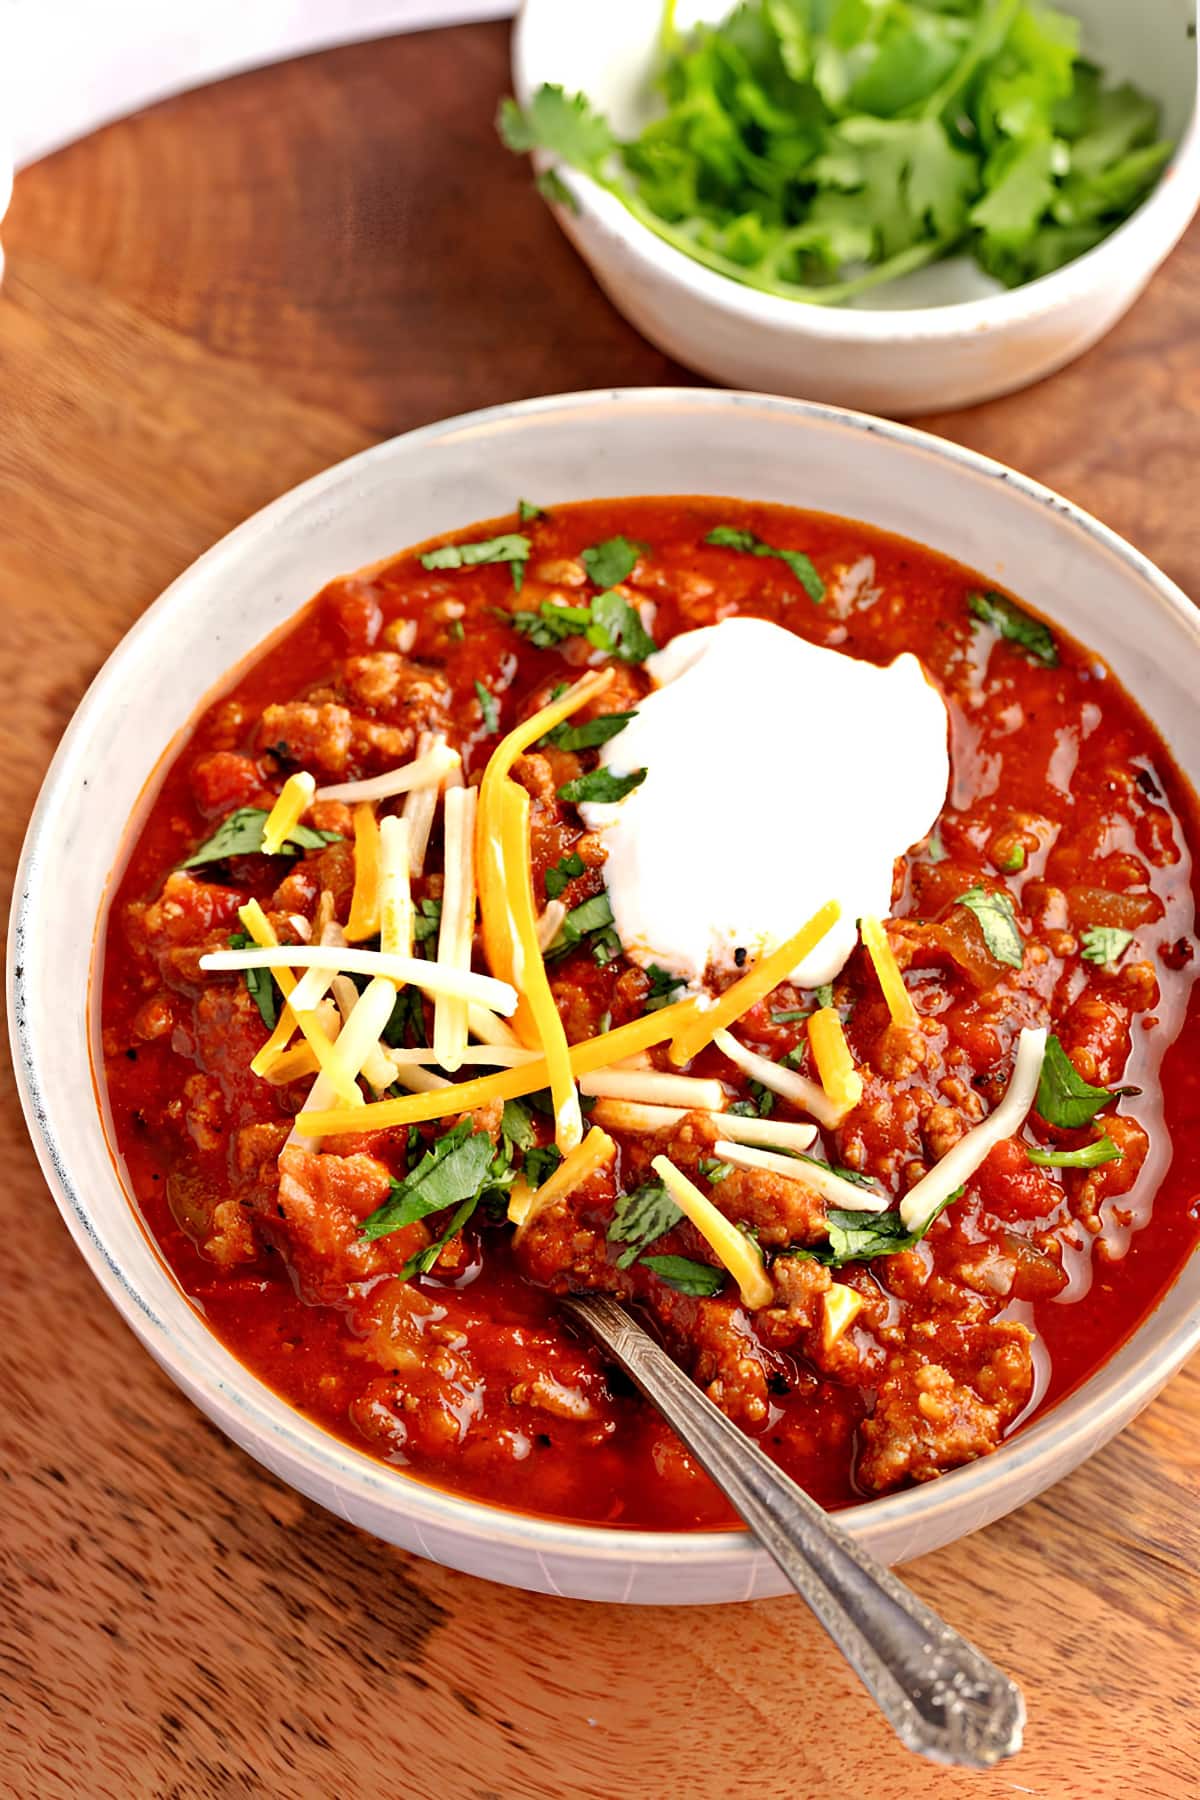 Chipotle Chili with Meat, Kidney Beans, Peppers and Tomato Sauce